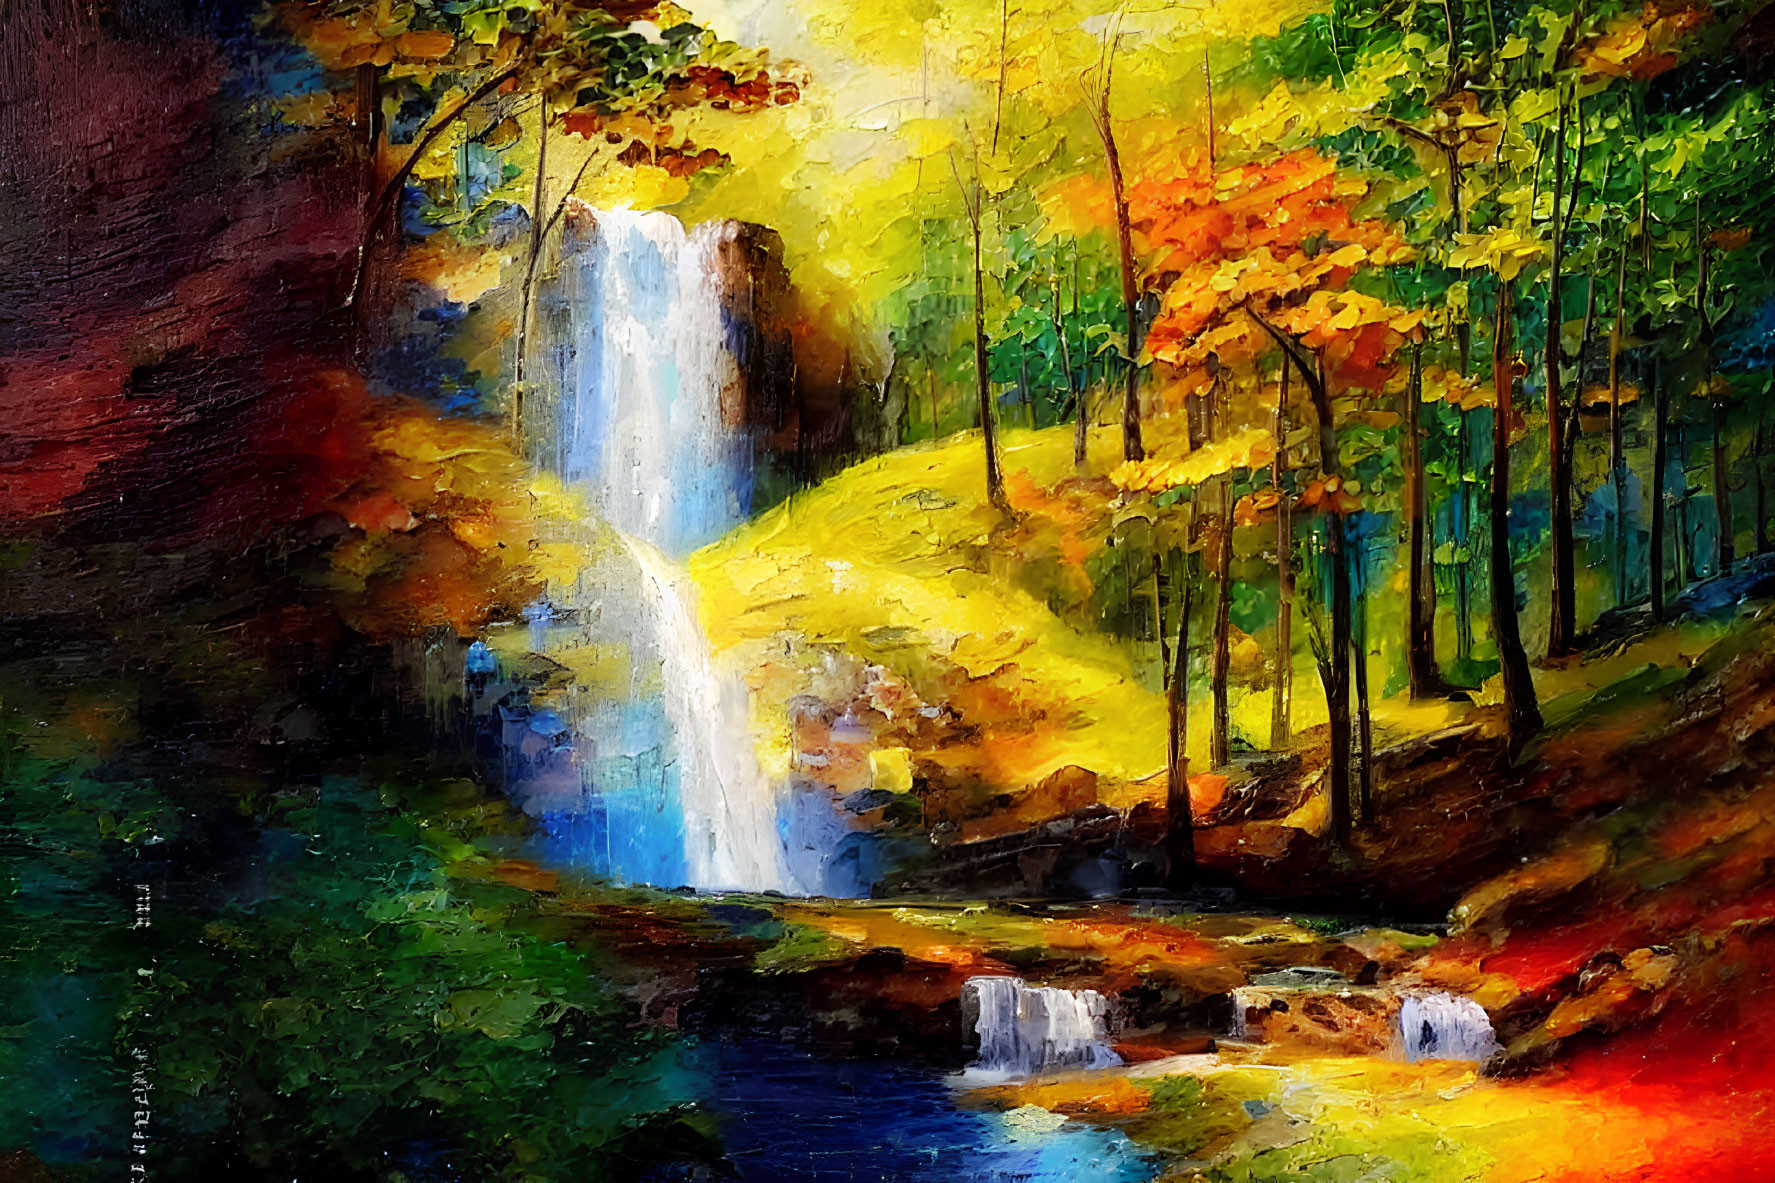 Vivid autumn forest waterfall painting with sunlight reflections